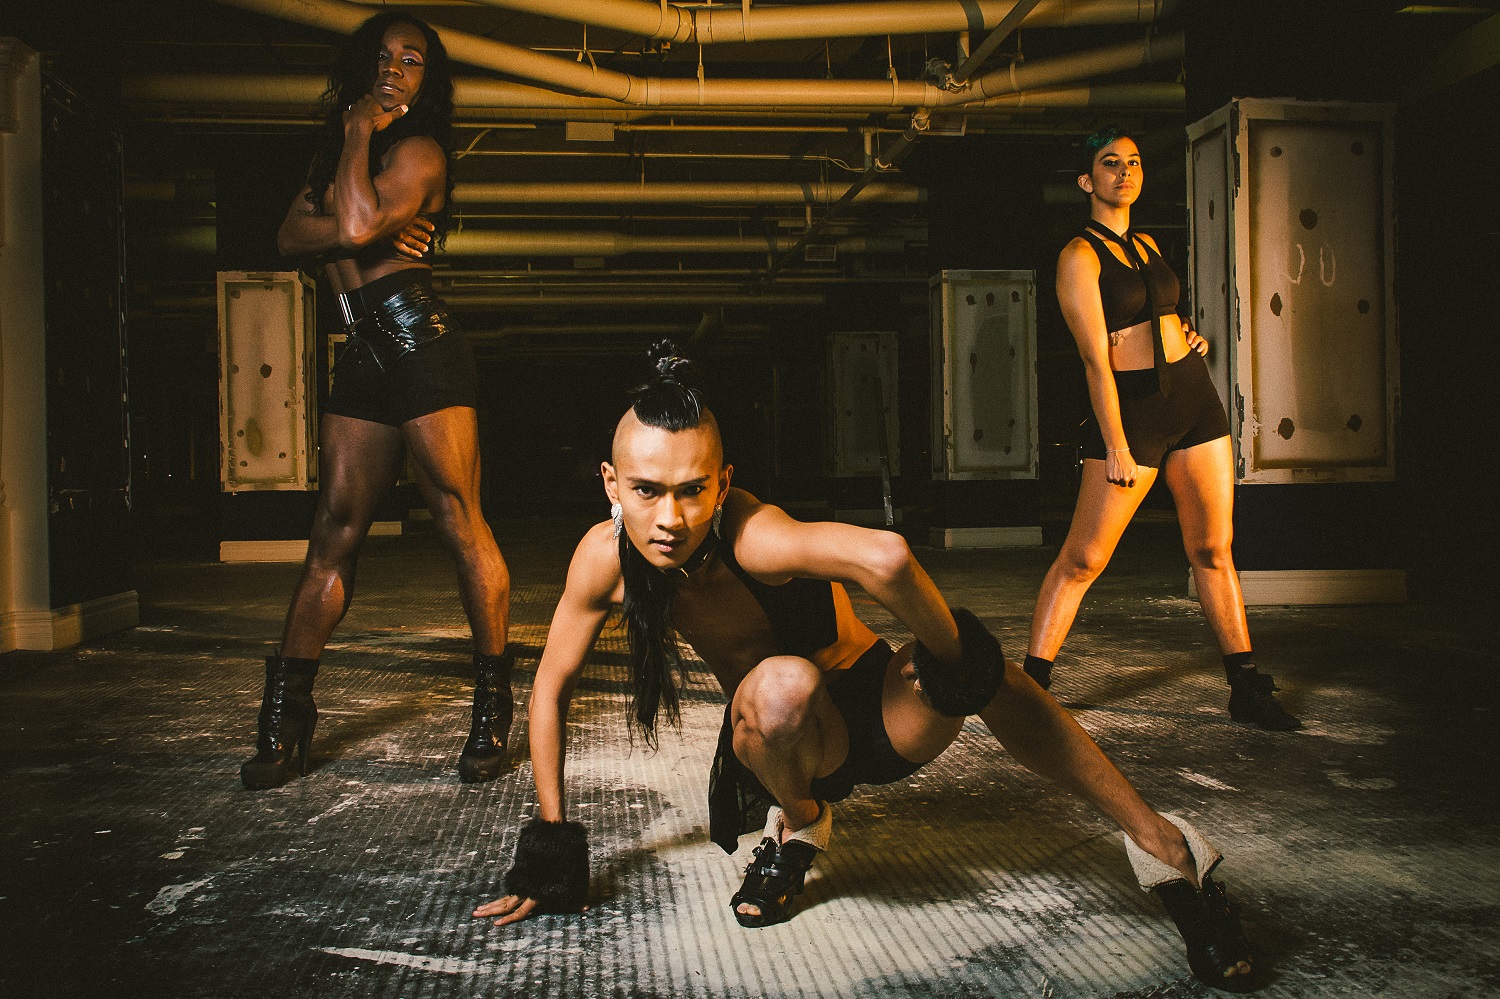 Dancers of ILL NANA/DiverseCity Dance Company pose in an industrial space.